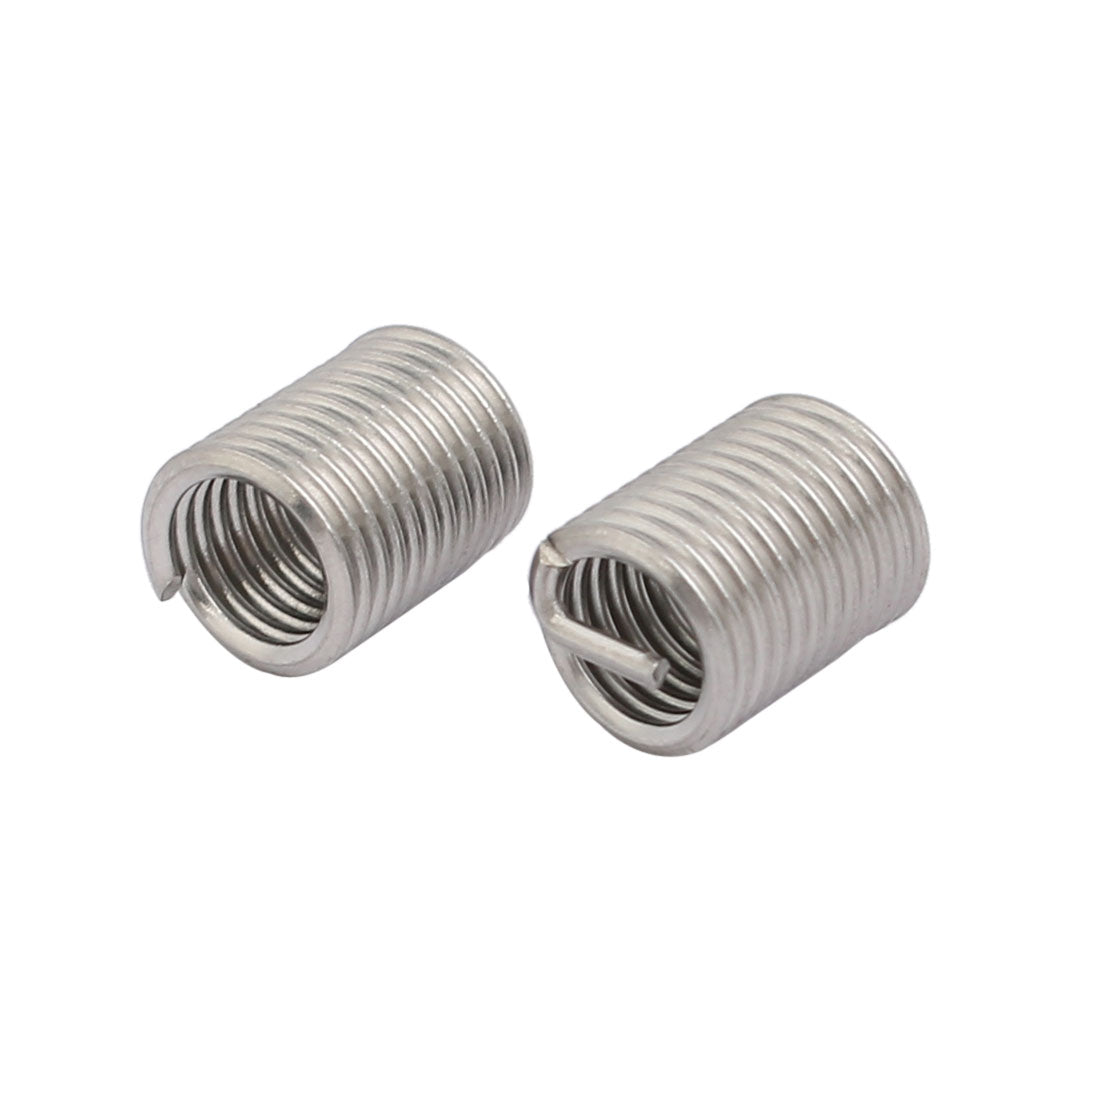 uxcell Uxcell M6x1mmx15mm 304 Stainless Steel Helical Coil Wire Thread Insert 50pcs